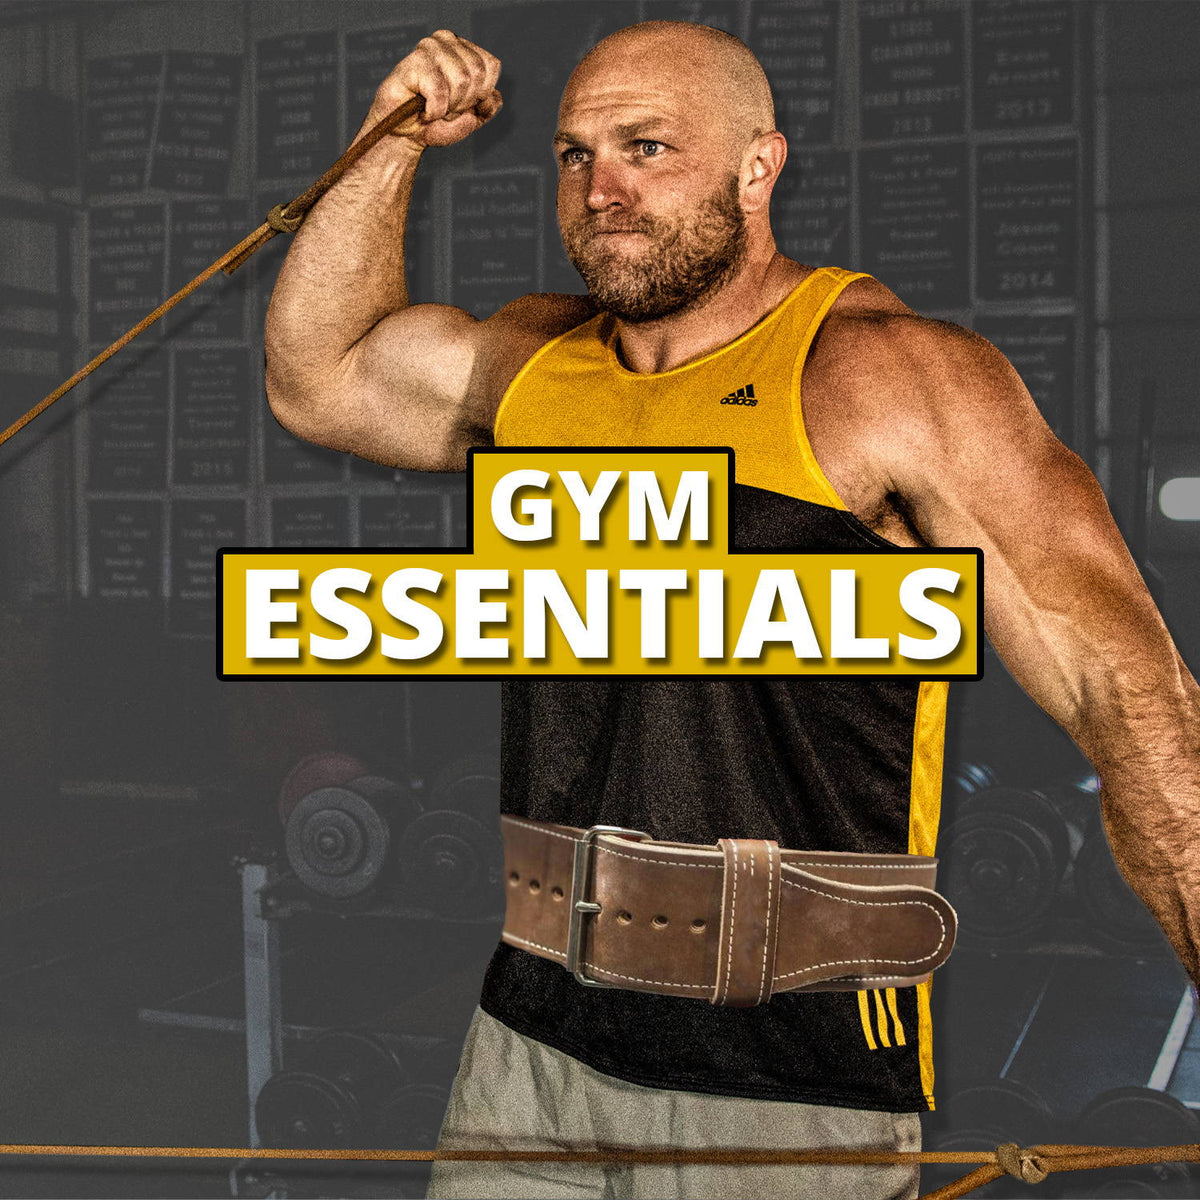 15 Gym Bag Essentials You Need For Every Workout – Garage Strength